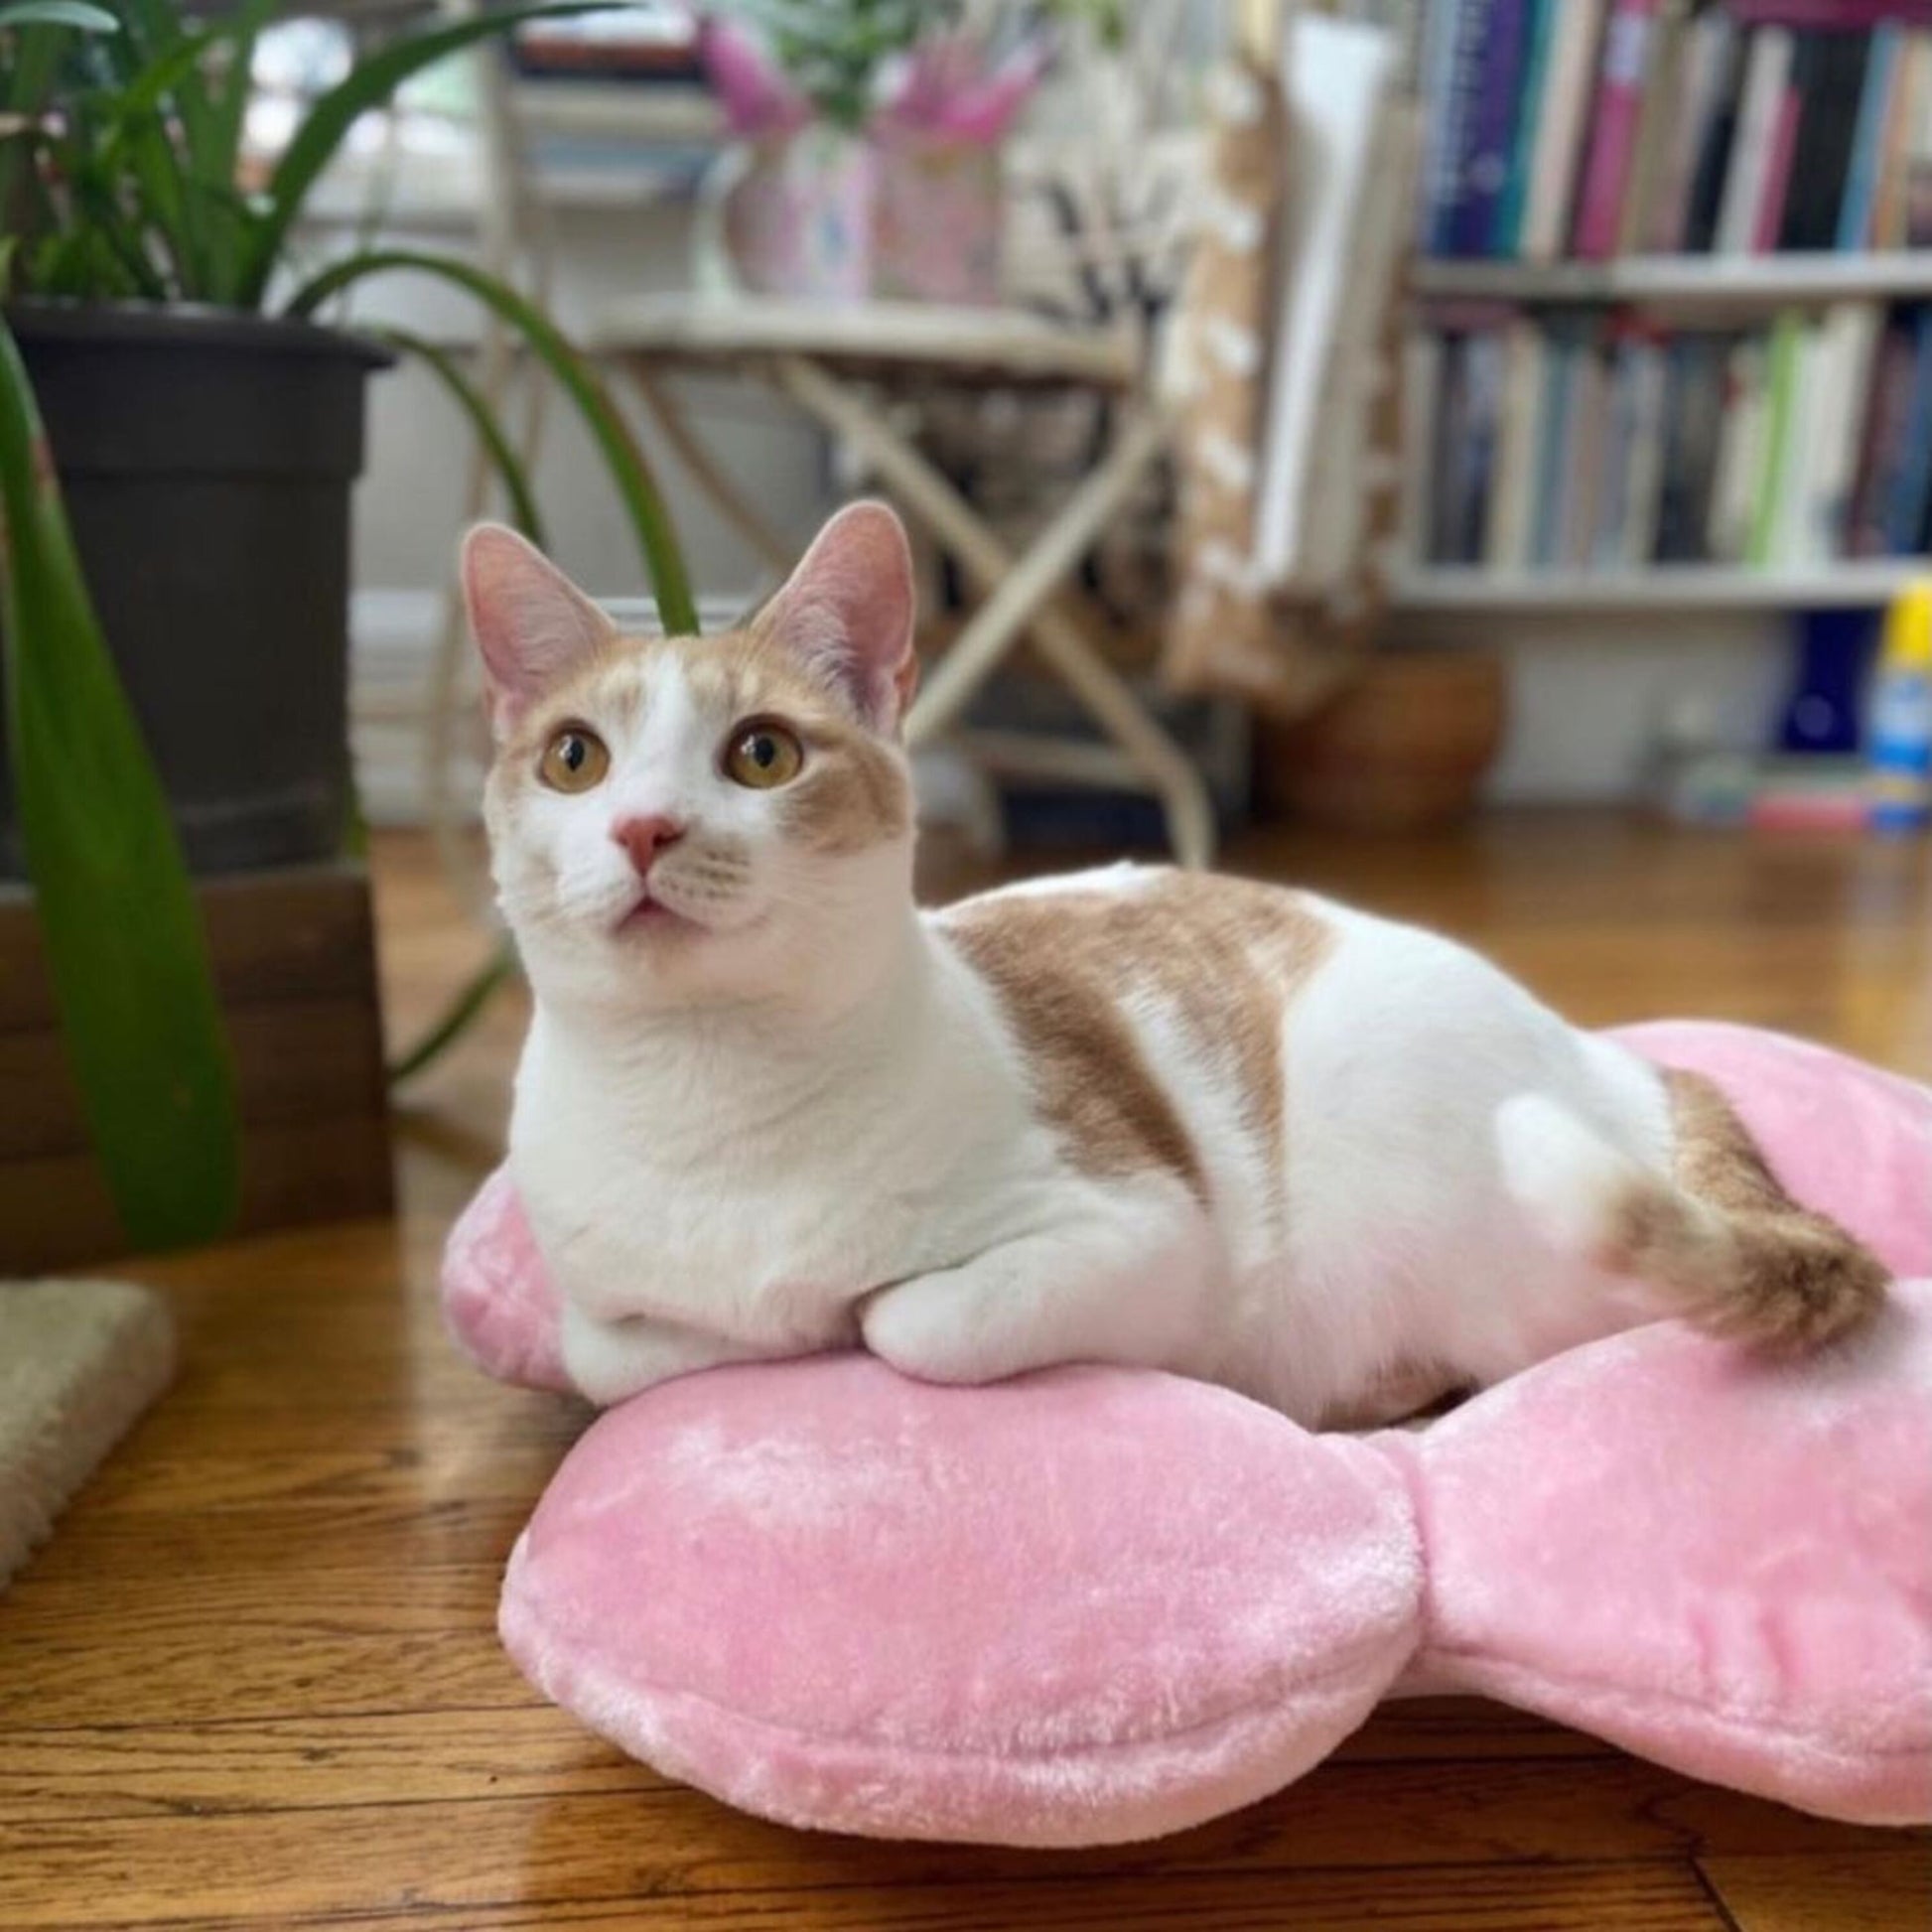 A cat relaxes on a pink pet bed, nestled amidst a floral cat tree